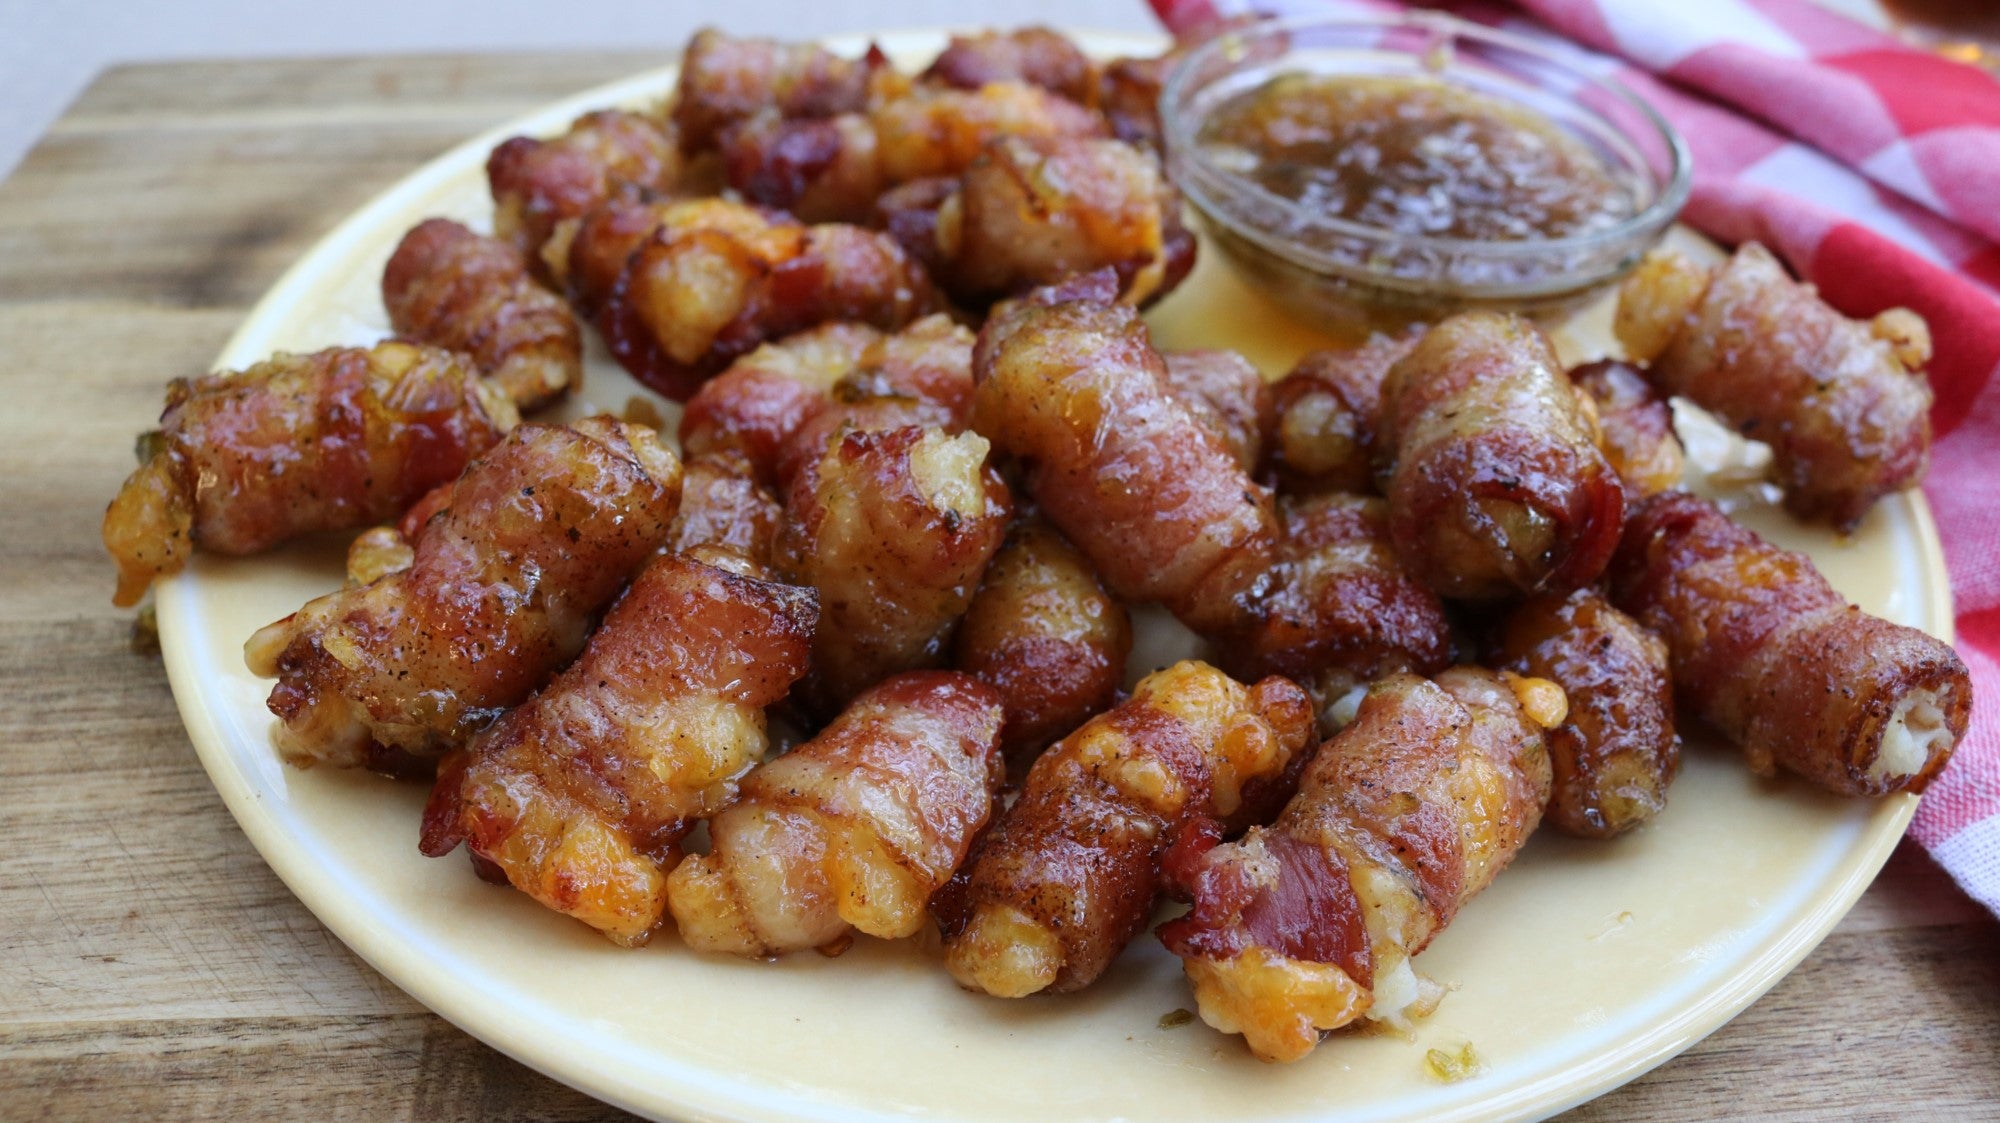 Bacon & Cheese Wrapped Tater Tots